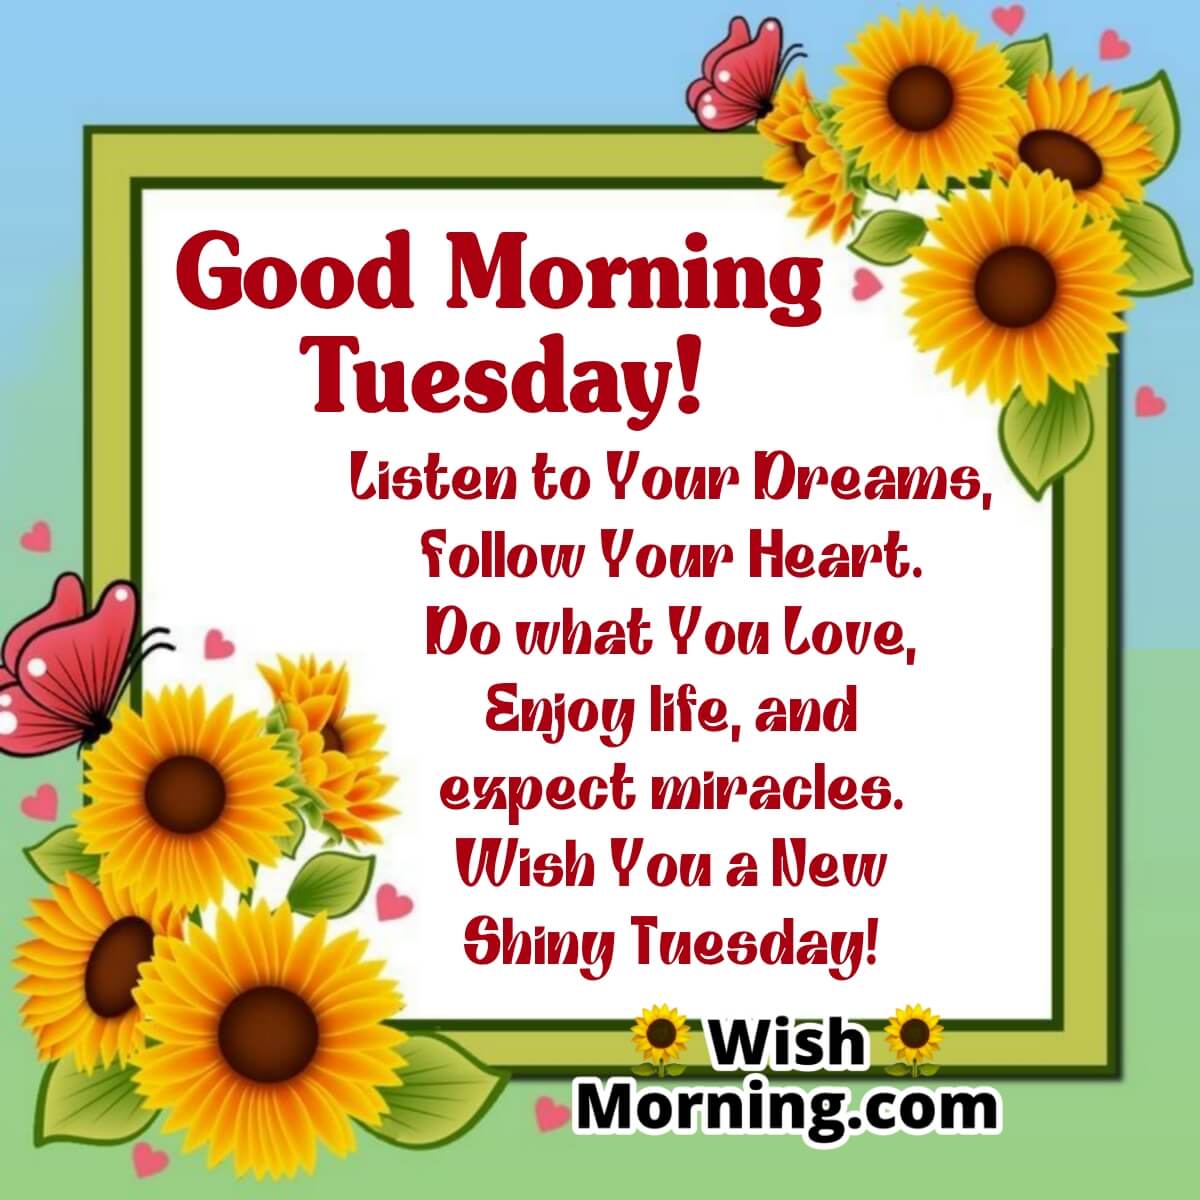 Good morning Tuesday Wishes, Quotes and Images for WhatsApp